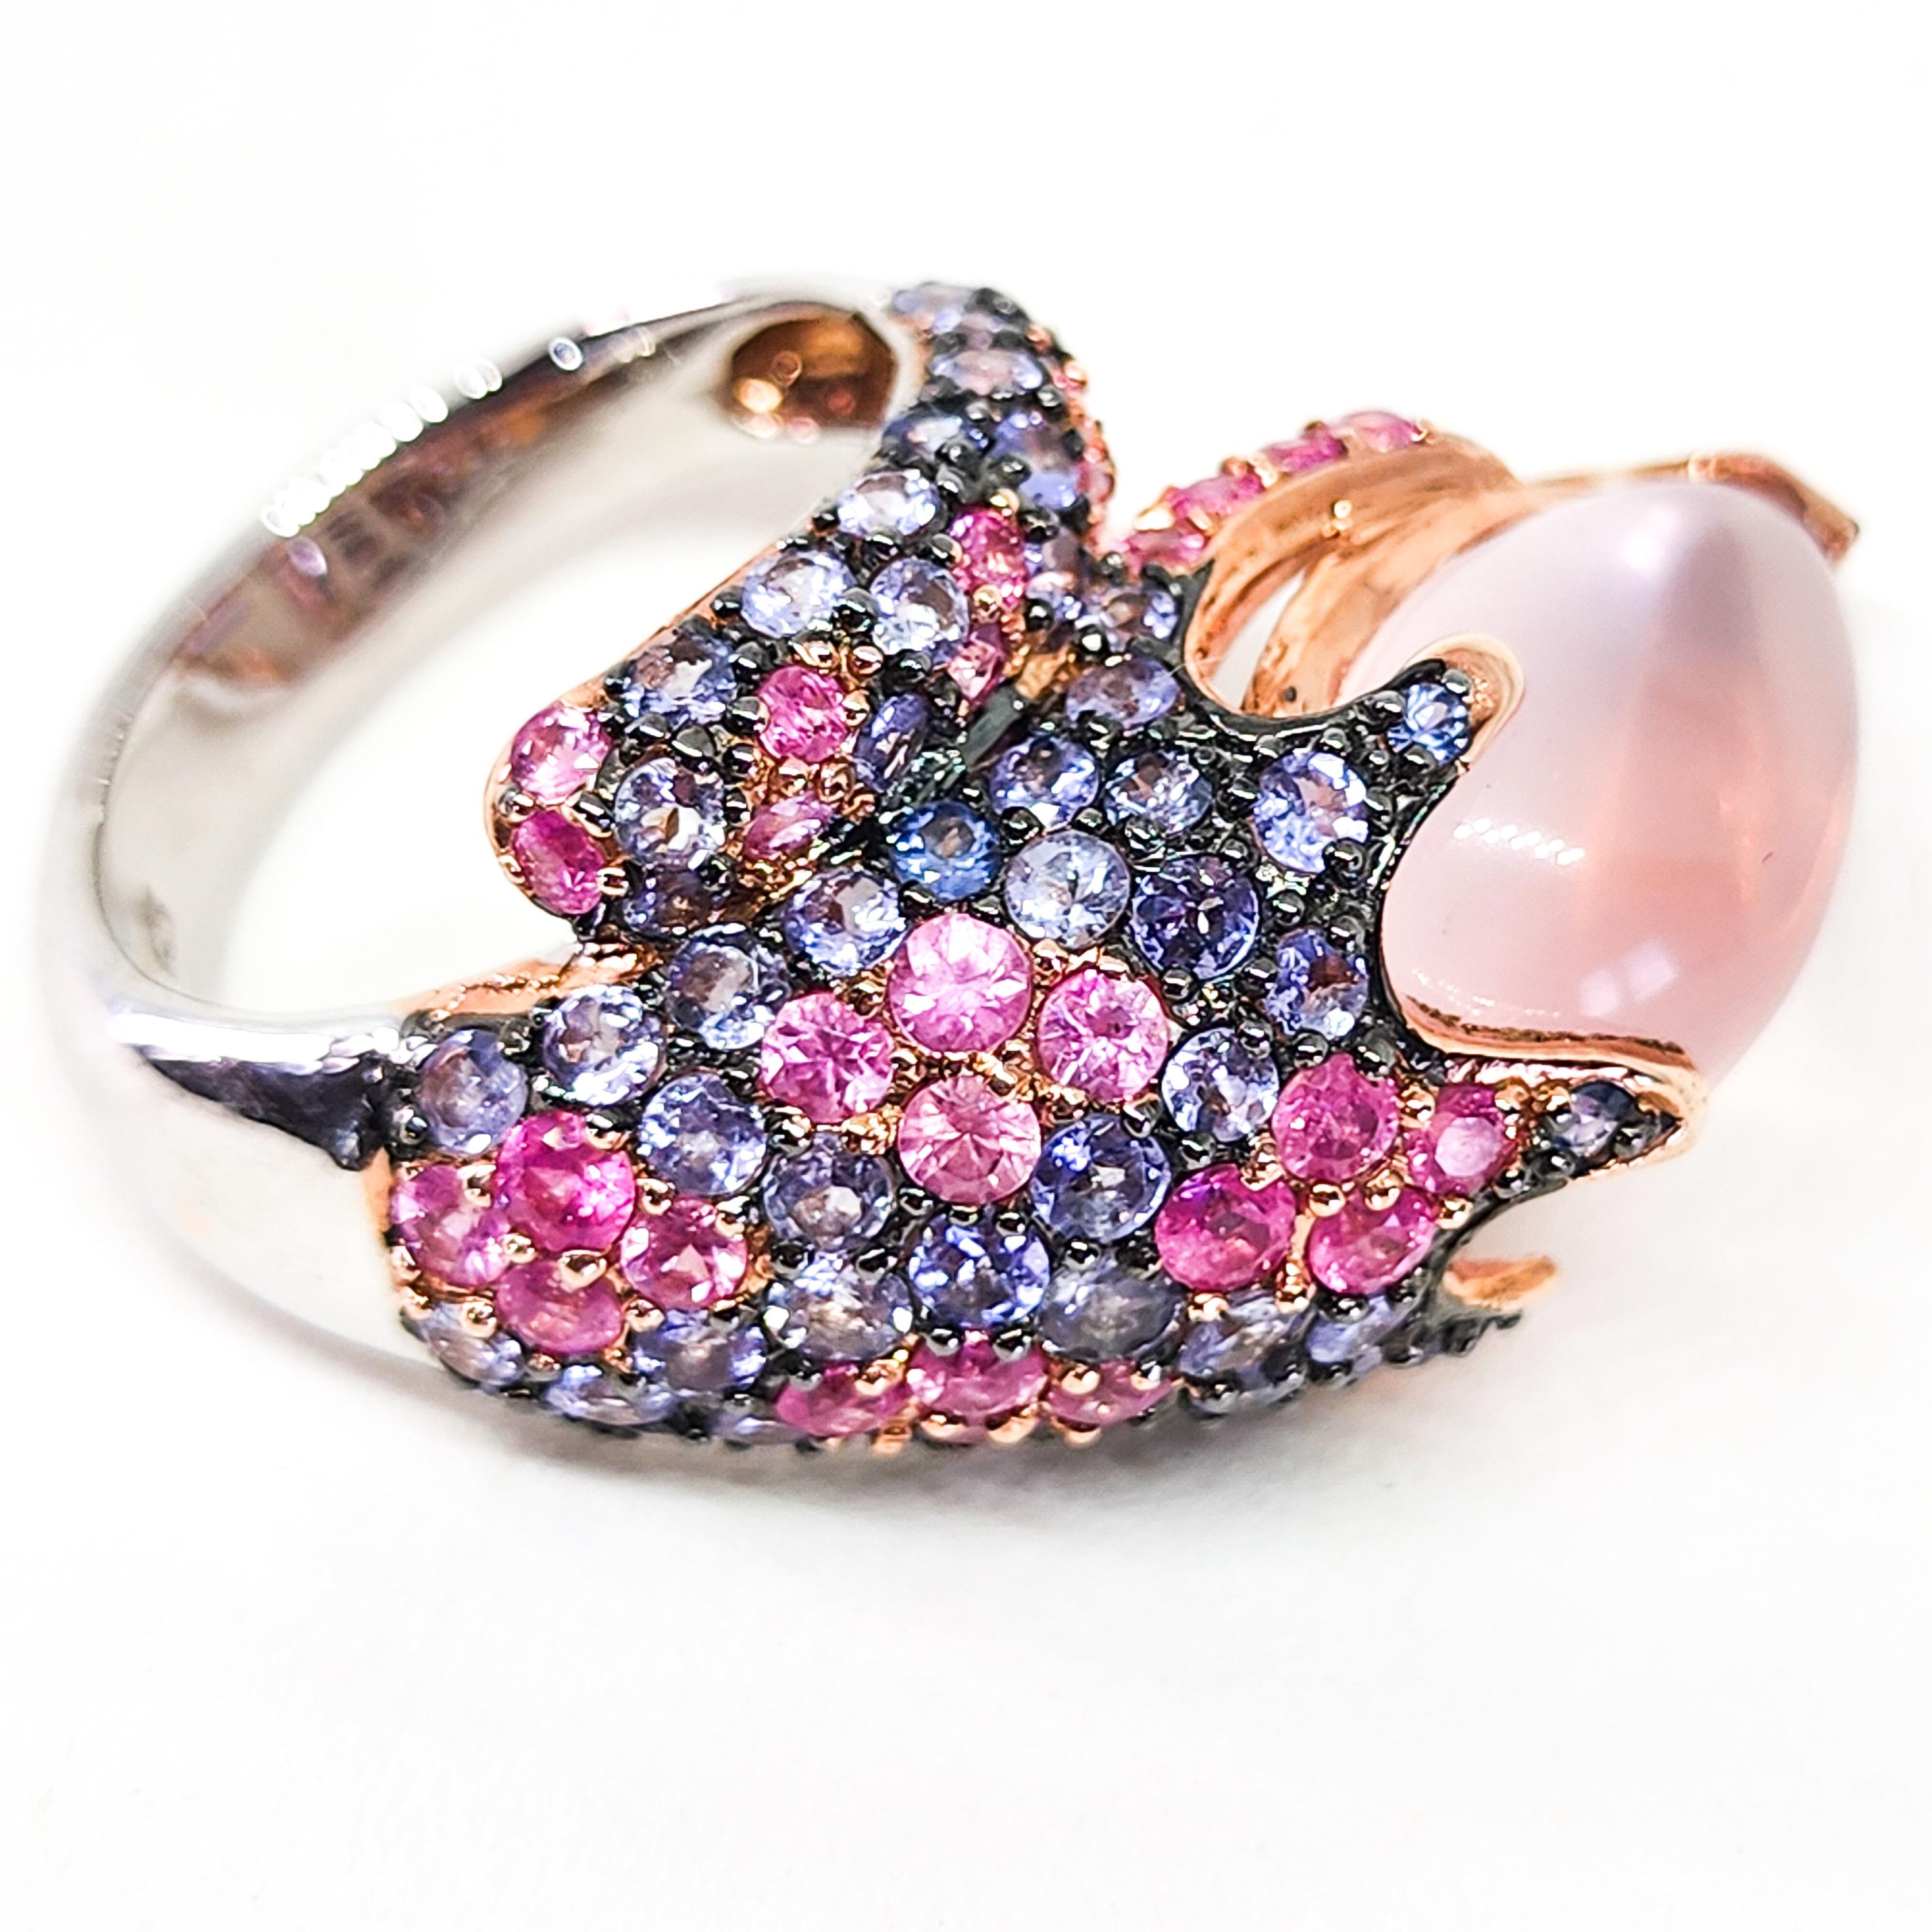 One large Domed, Bypass, Cocktail, Cluster Ring featuring a Deliciously Sweet Confectionery of Colored Gemstones in Pinks, Blues and Purples. This festive Ring is an appropriate accent for all seasons wear.  The Large face of the Ring is a wrap